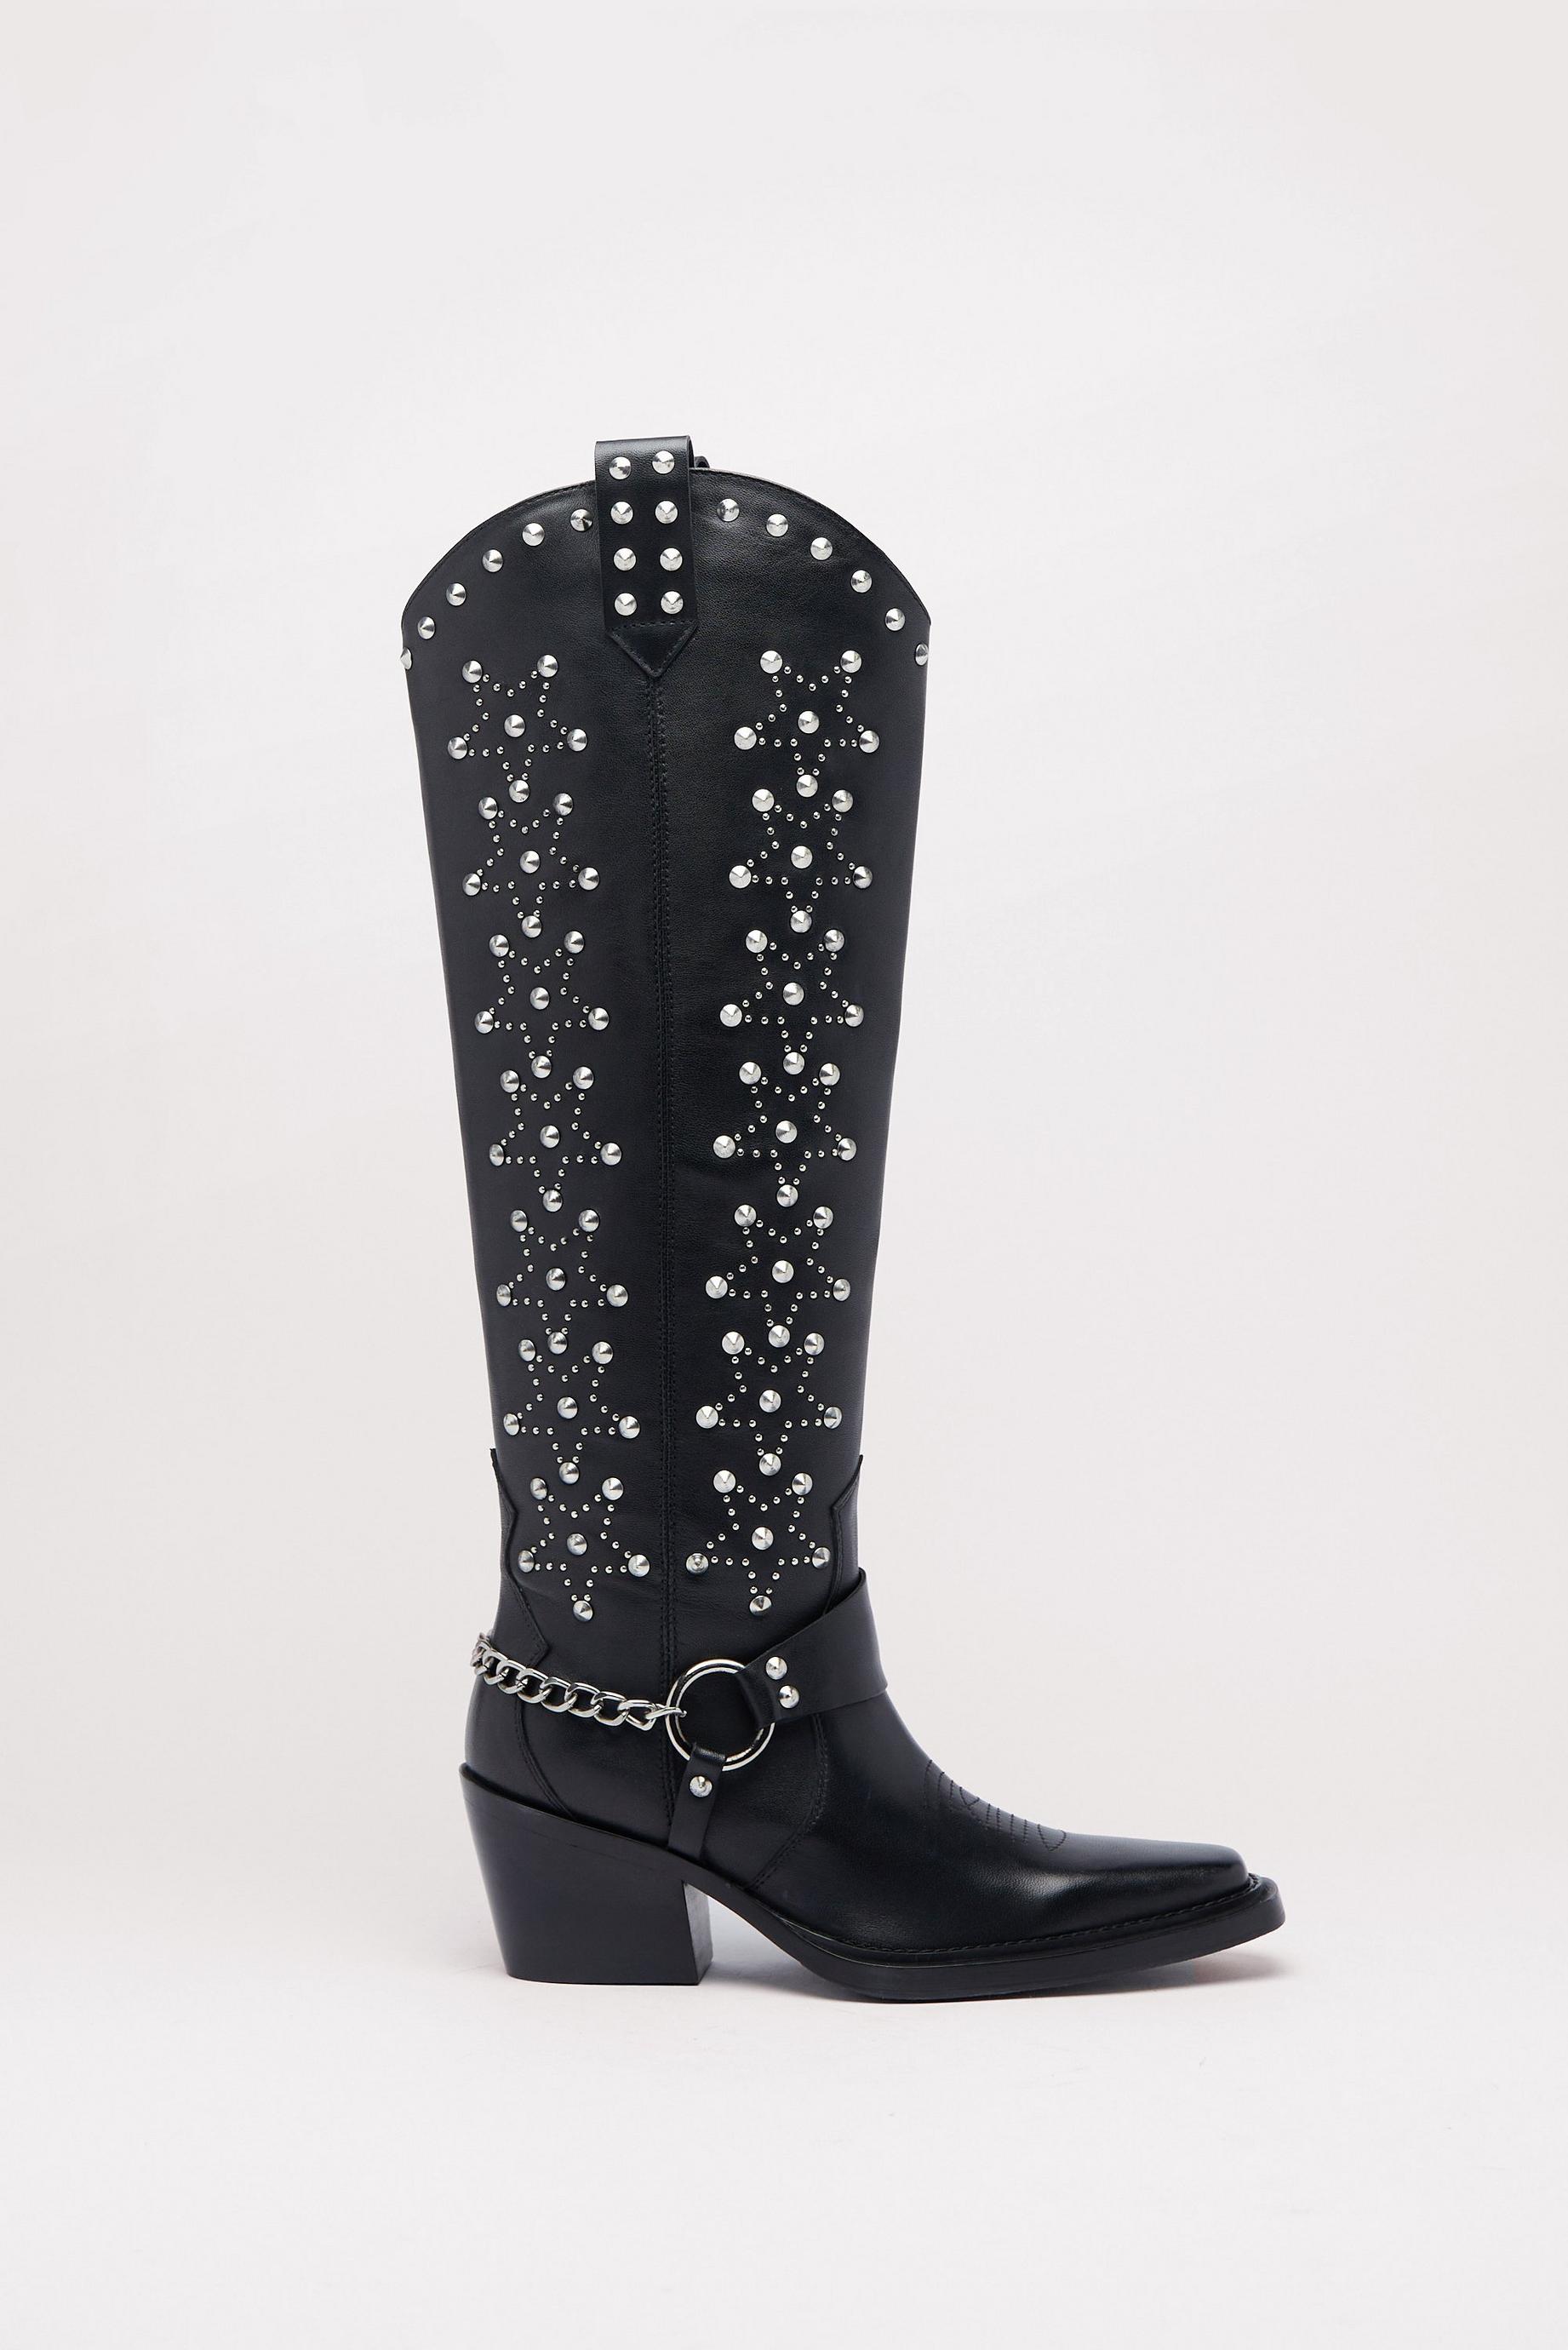 Leather Star Studded Knee High Cowboy Boots